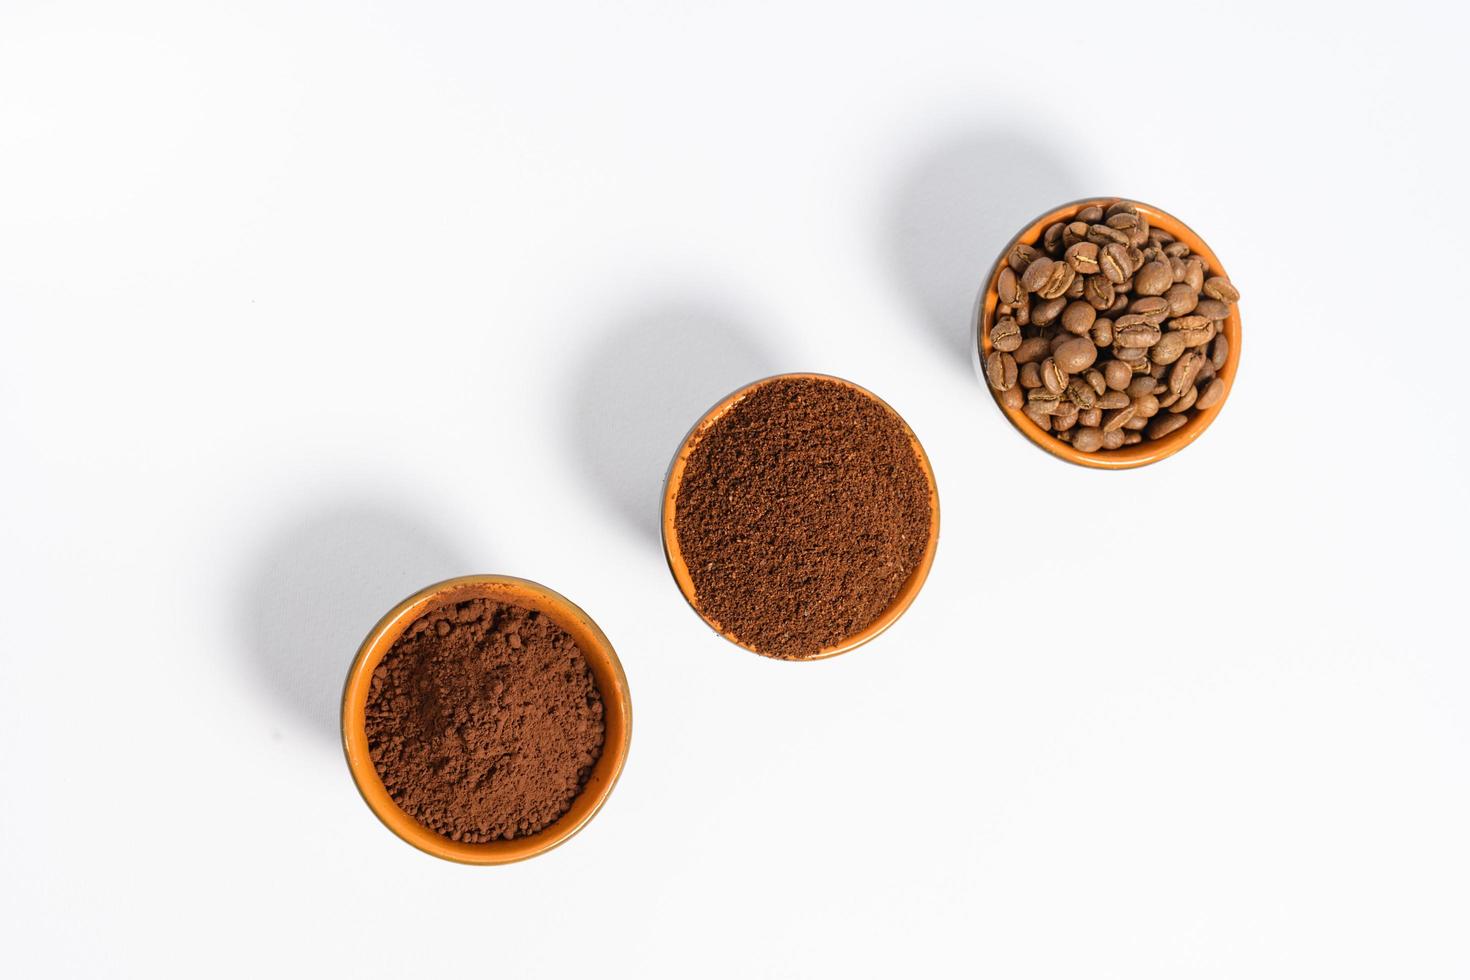 Three cups of coffee beans, ground coffee and cocoa for comparison. photo